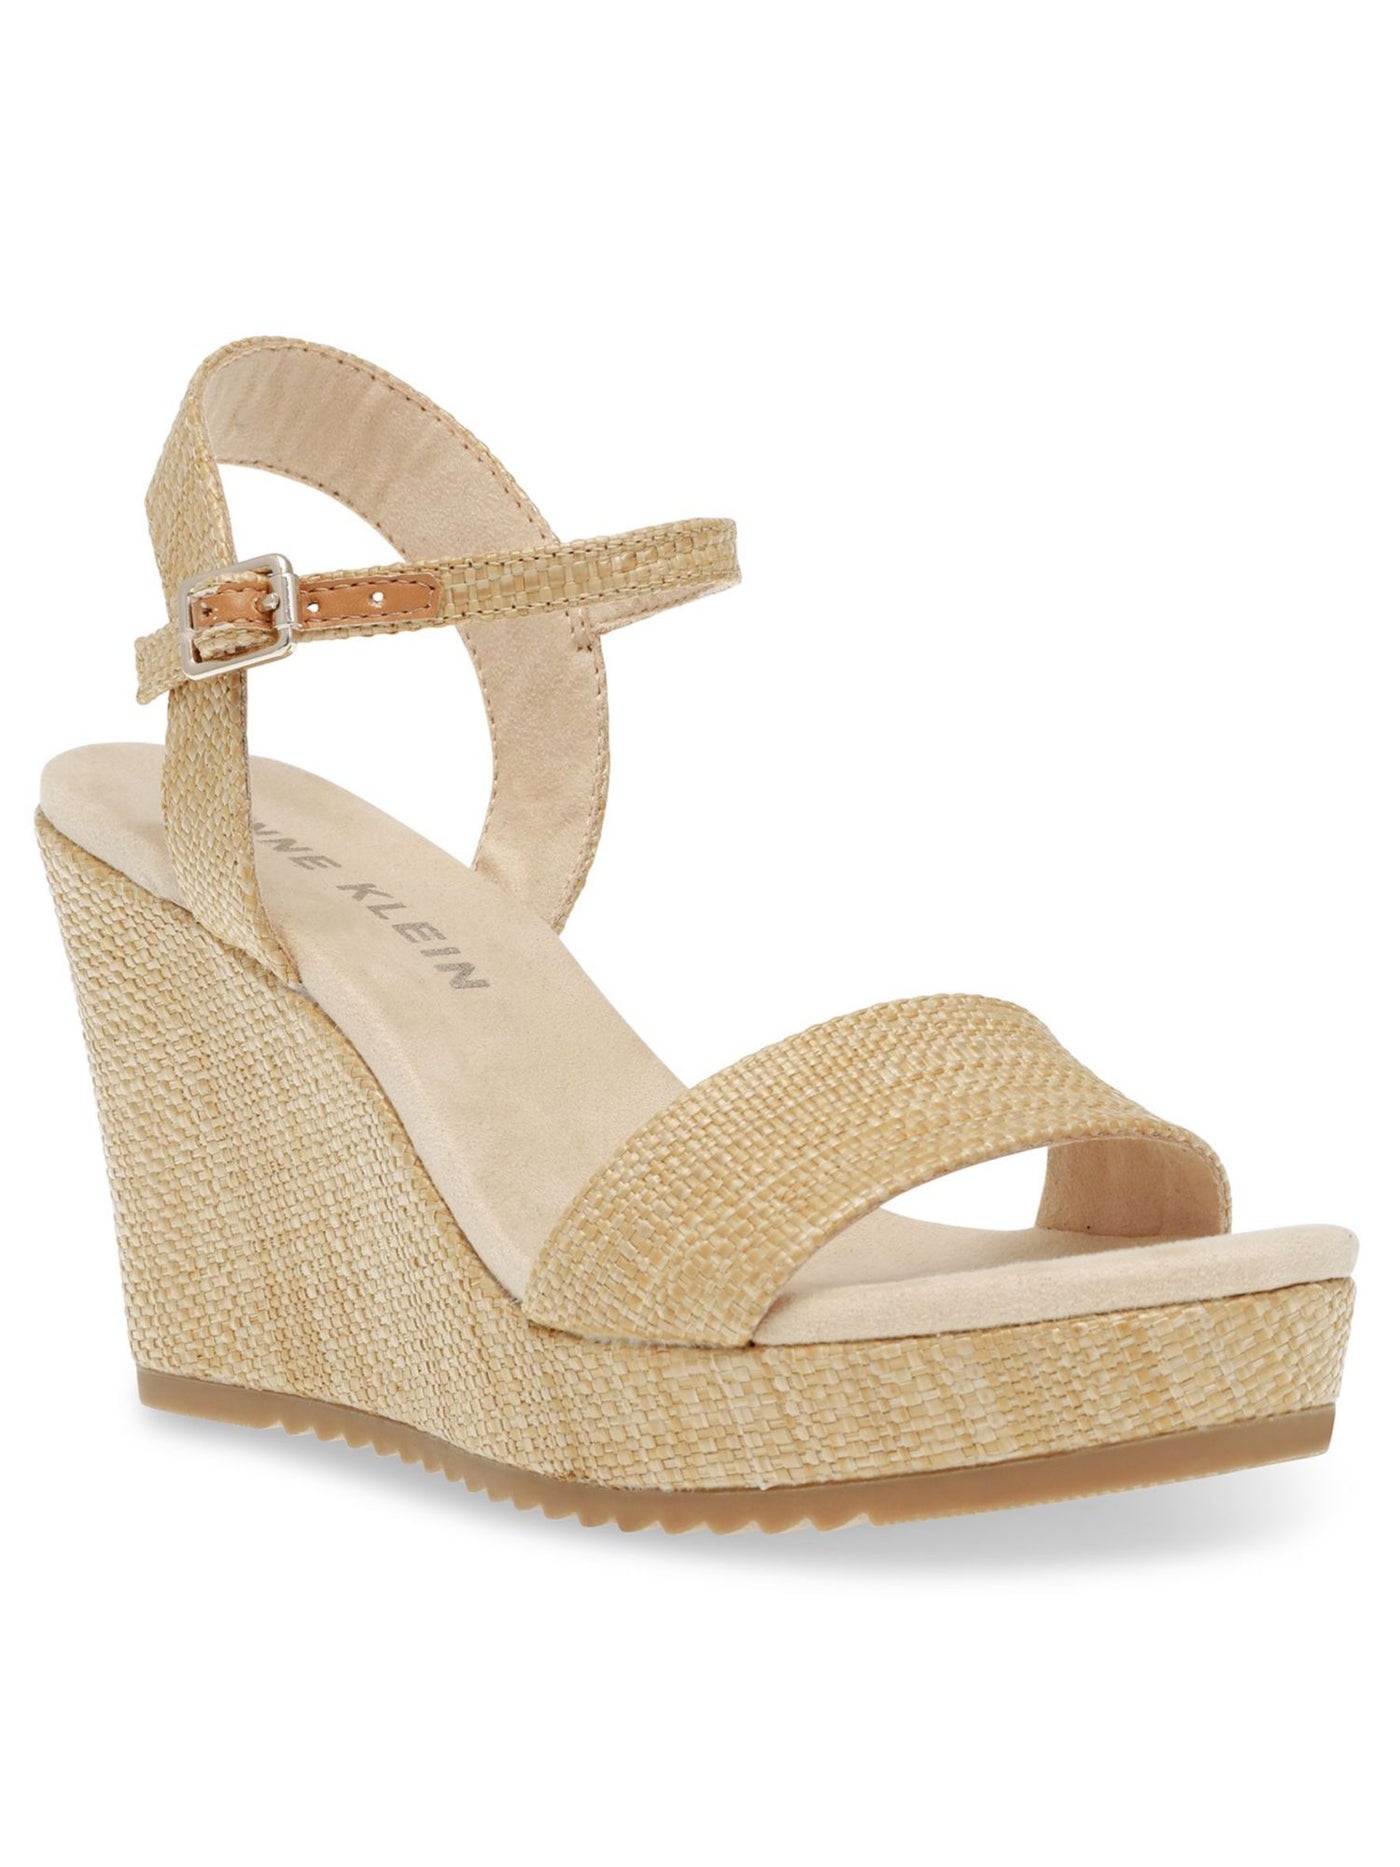 ANNE KLEIN Womens Beige Woven Padded Ankle Strap Adjustable Wella Round Toe Wedge Buckle Heeled Sandal 10.5 M